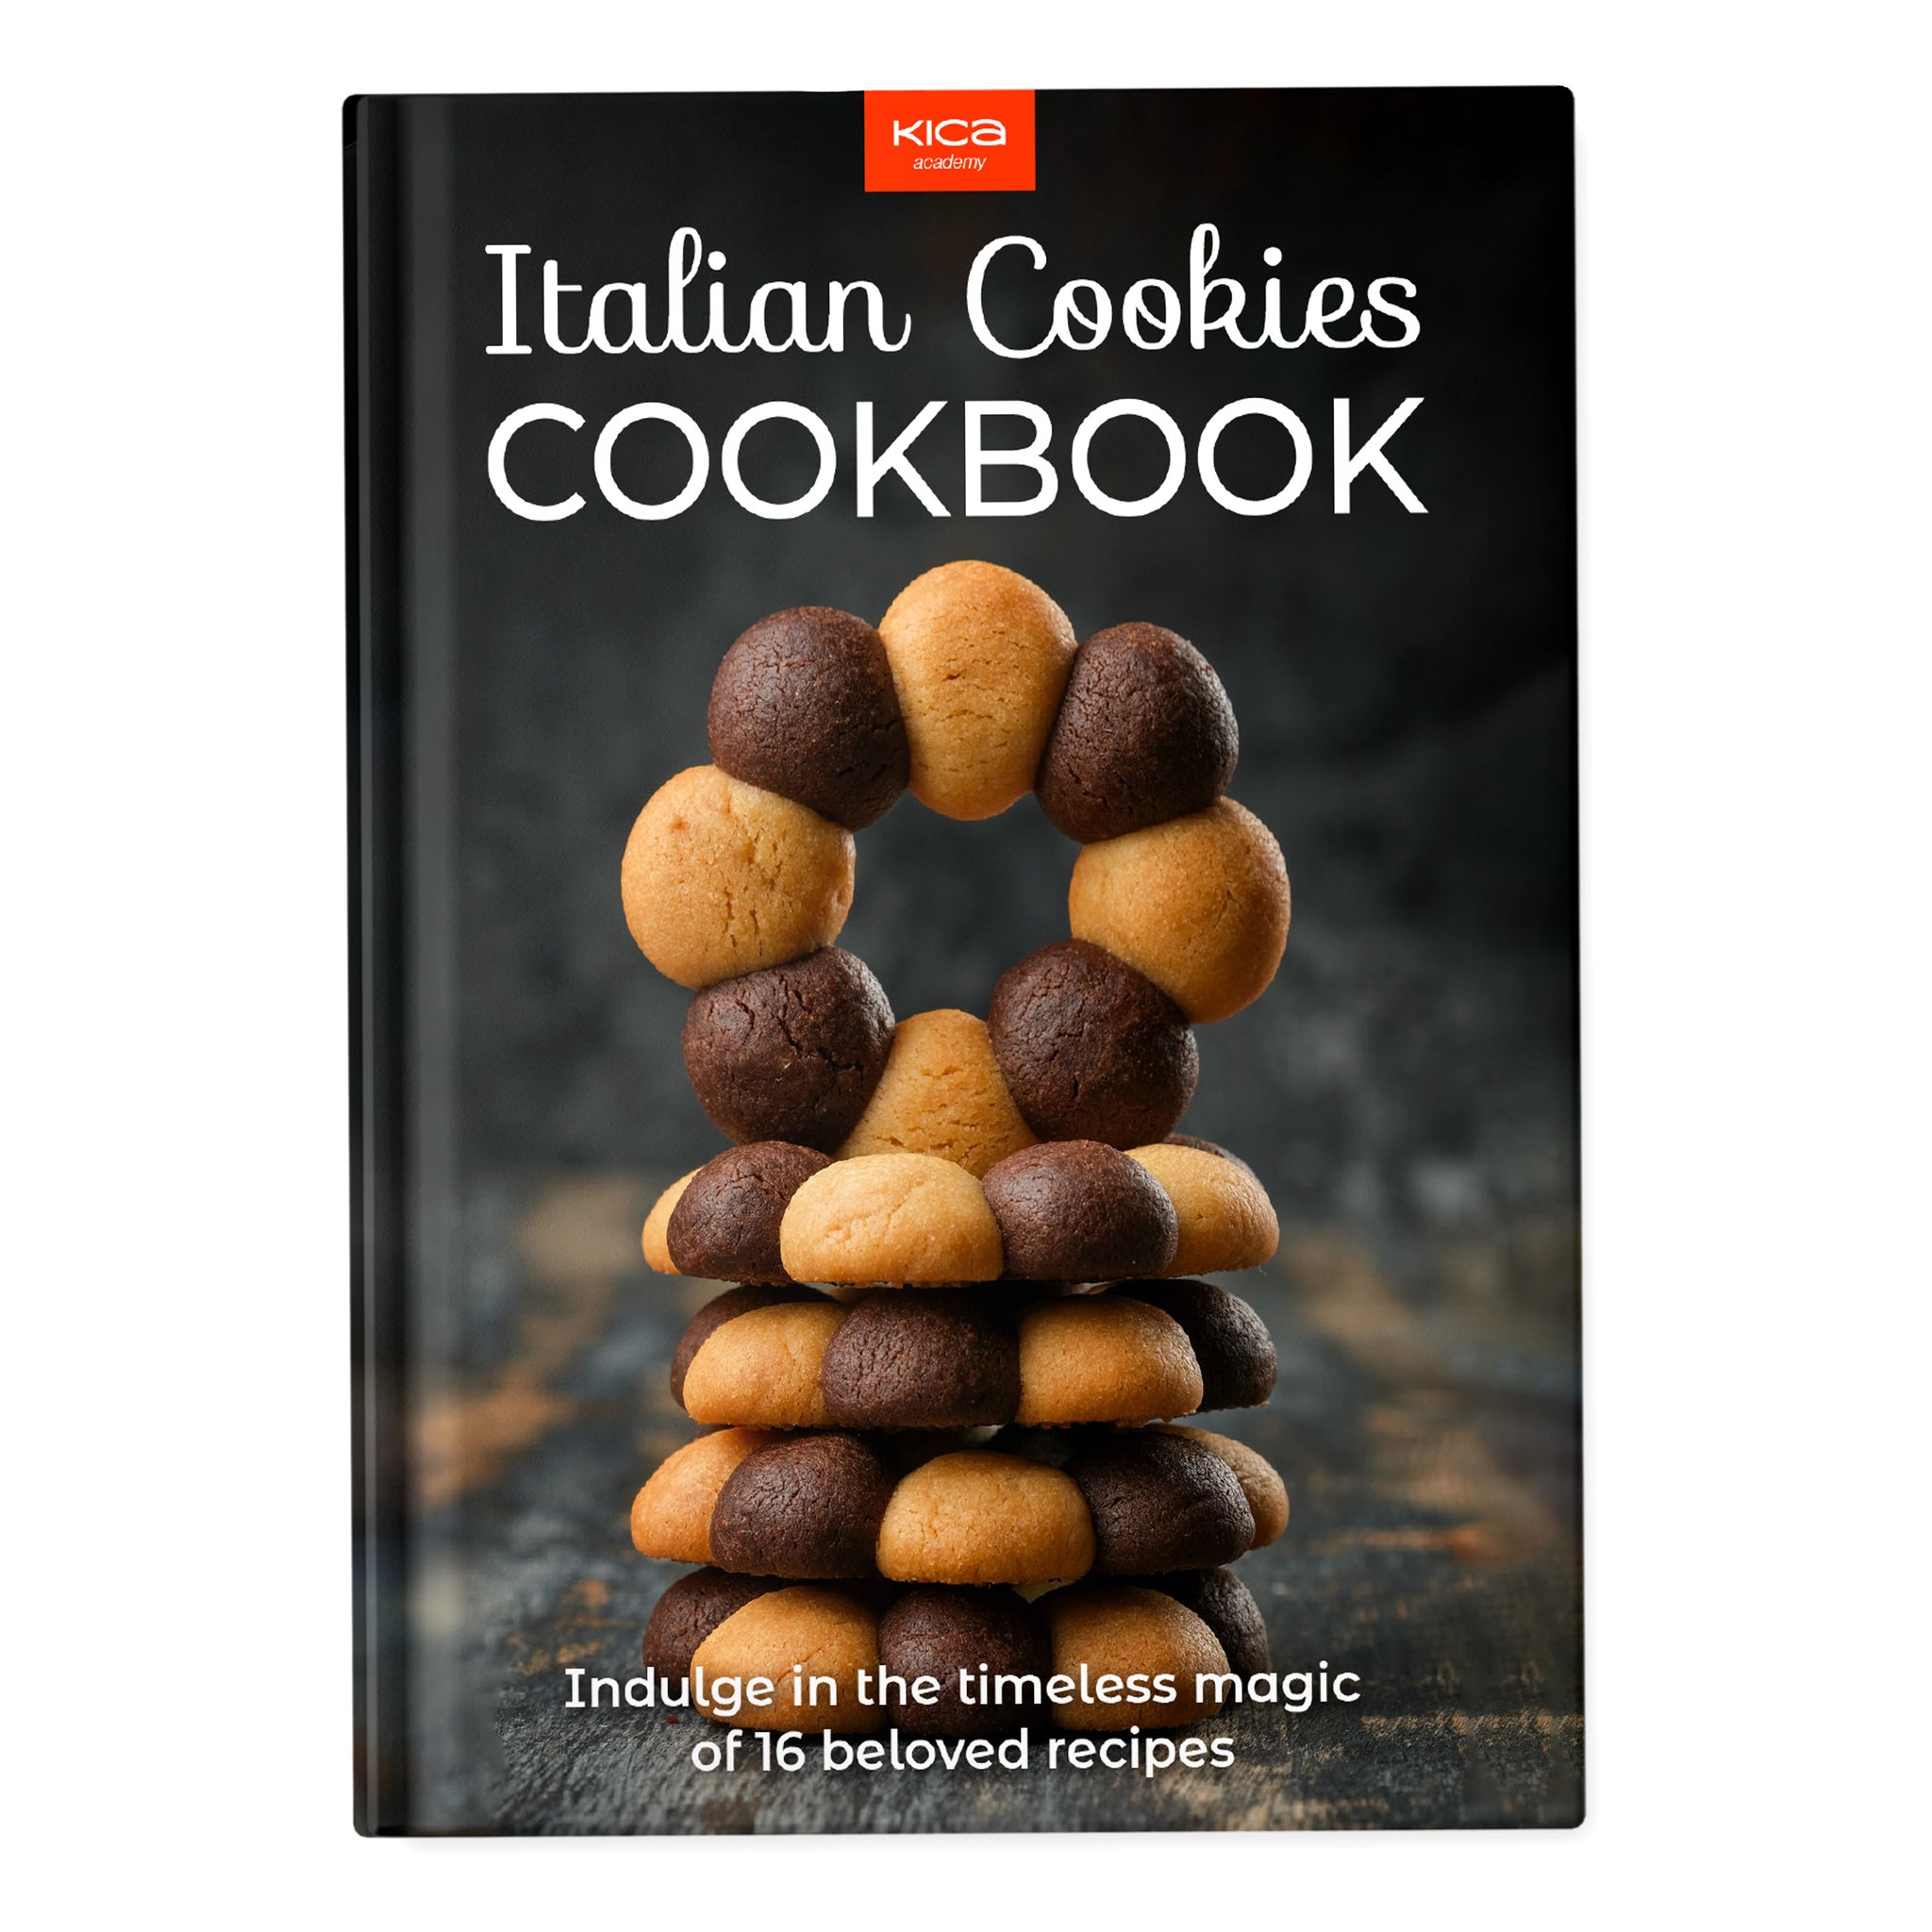 Italian Cookies Cookbook: Indulge in the timeless magic of 16 beloved recipes